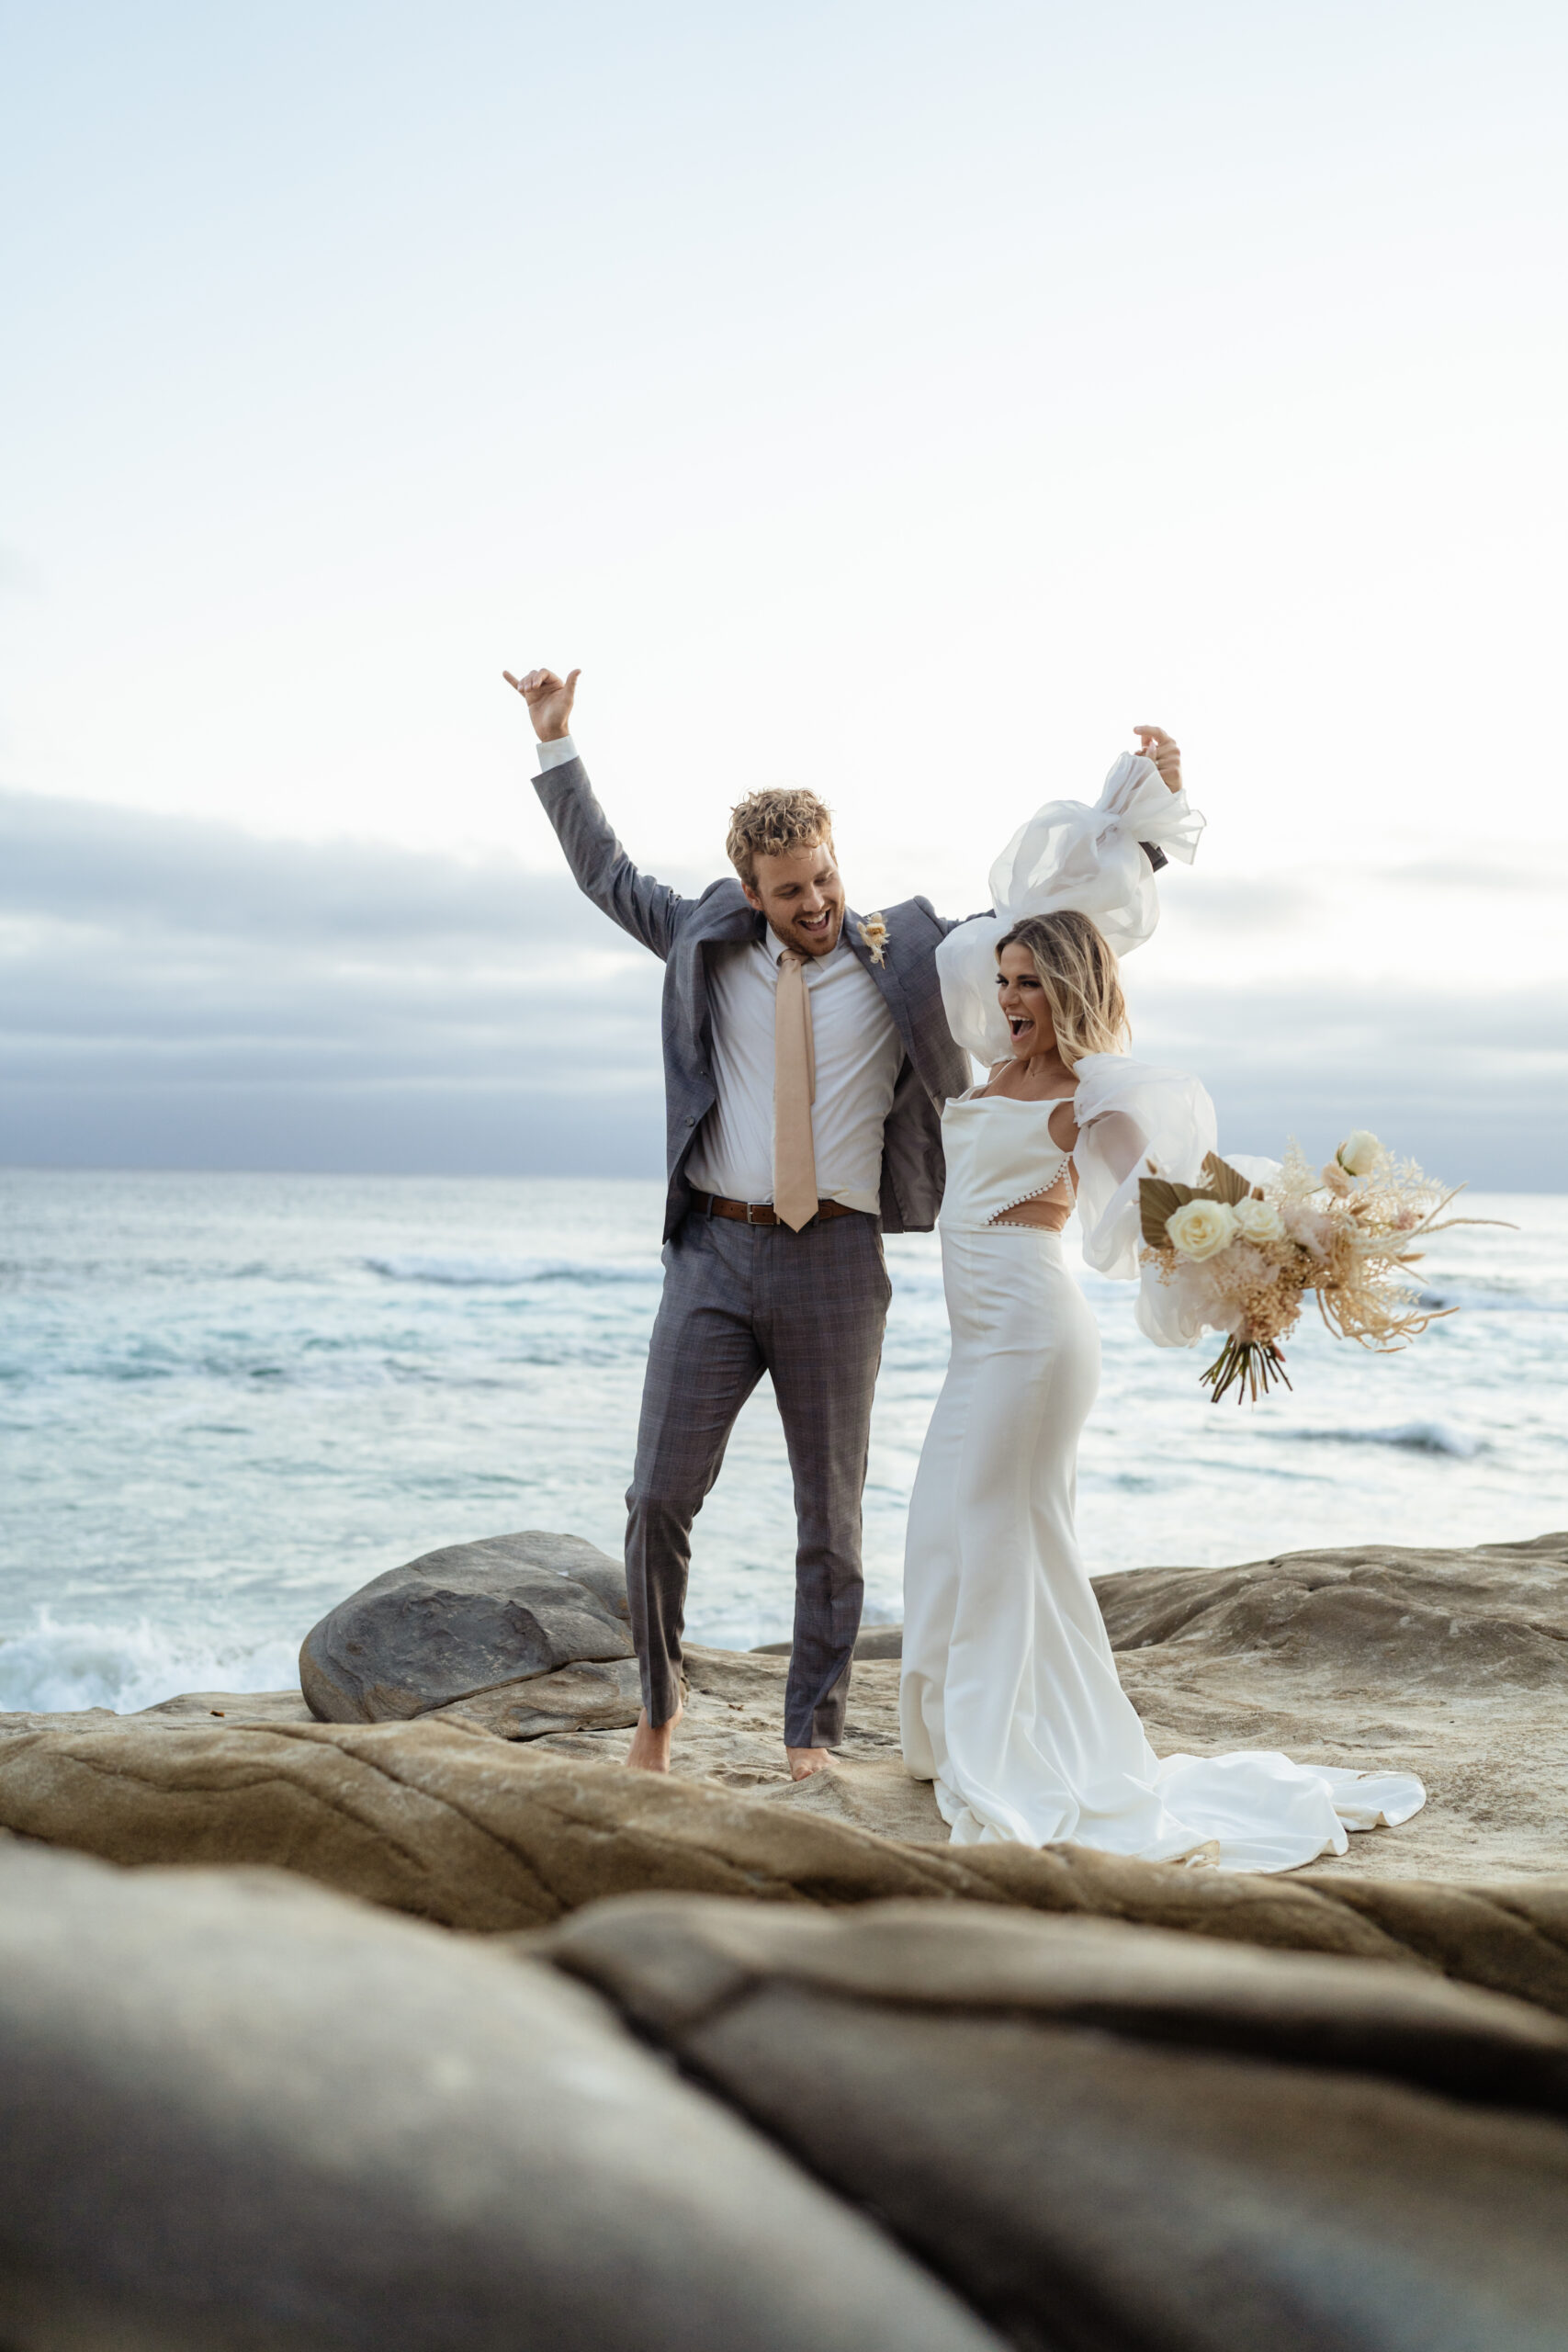 A couple in wedding attire cheering with their hands help up right after eloping on the beach. They are standing on a rock with the ocean behind them. The bride is holding a bouquet of flowers.